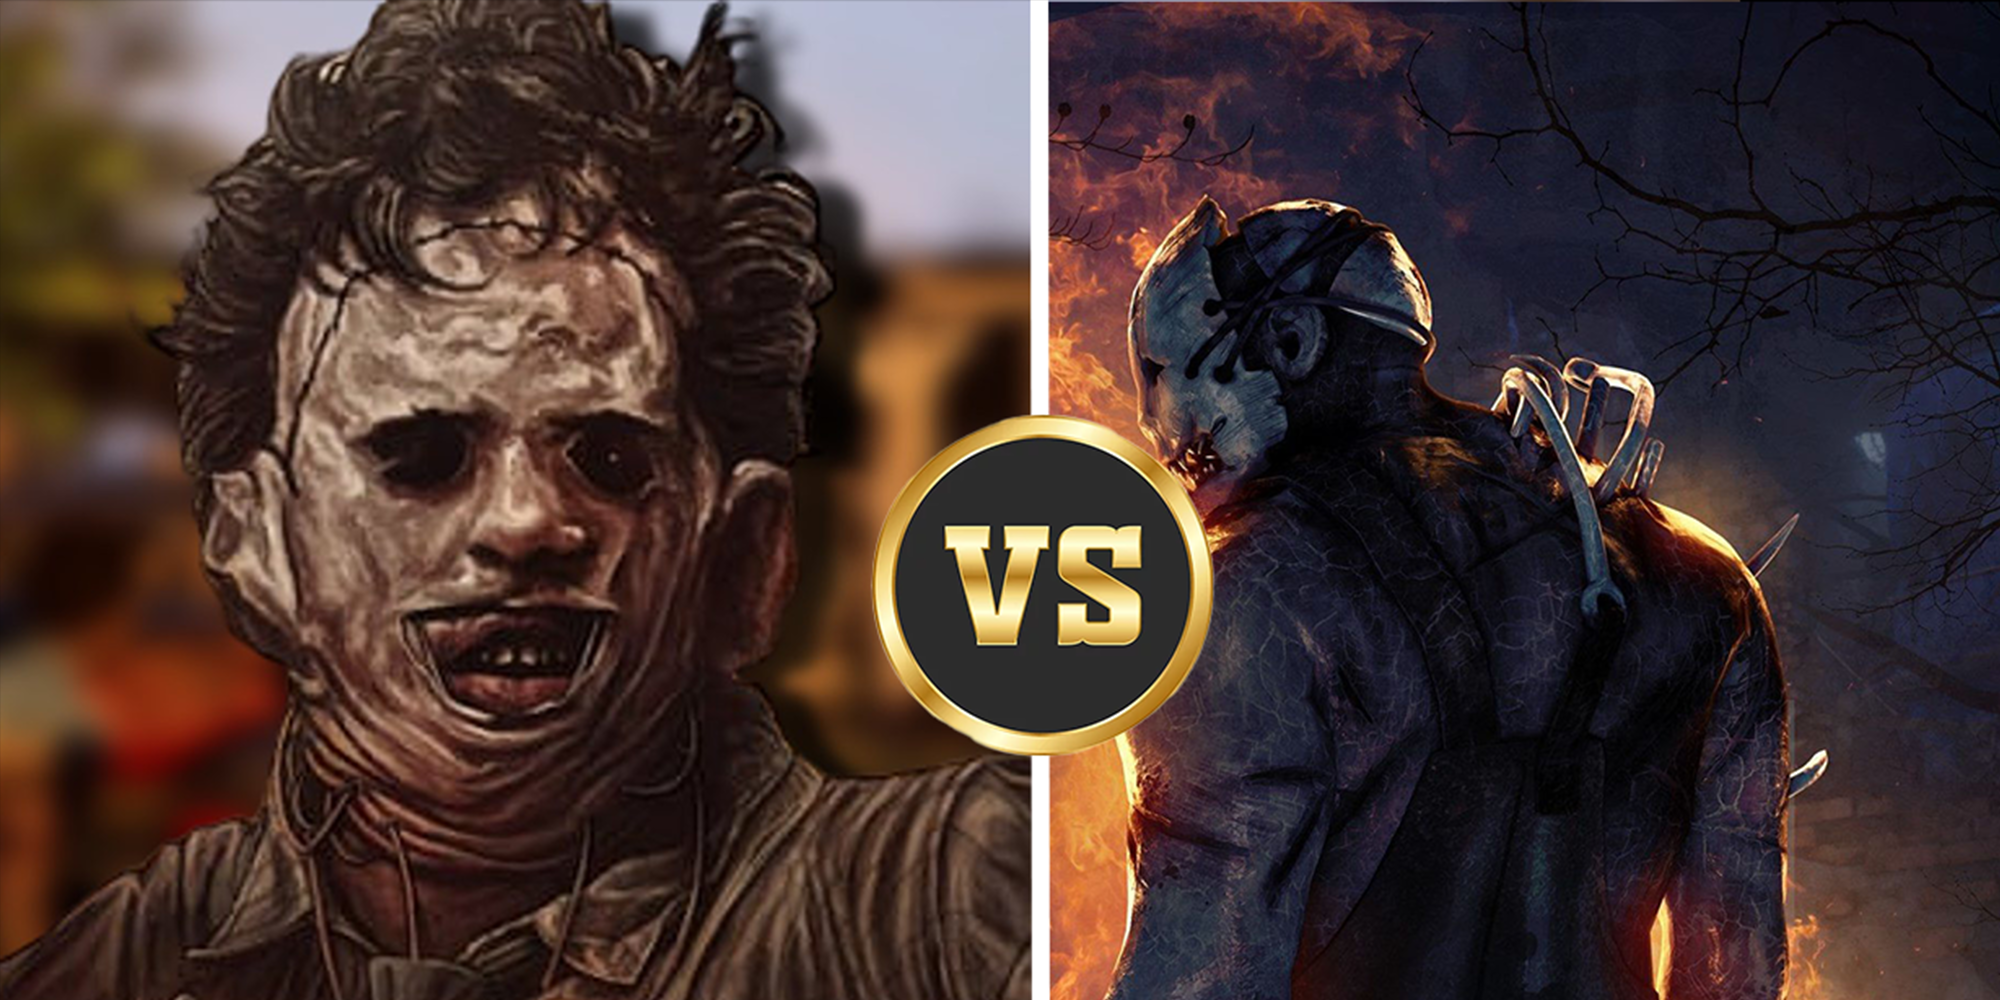 The Texas Chainsaw Massacre Vs Dead By Daylight